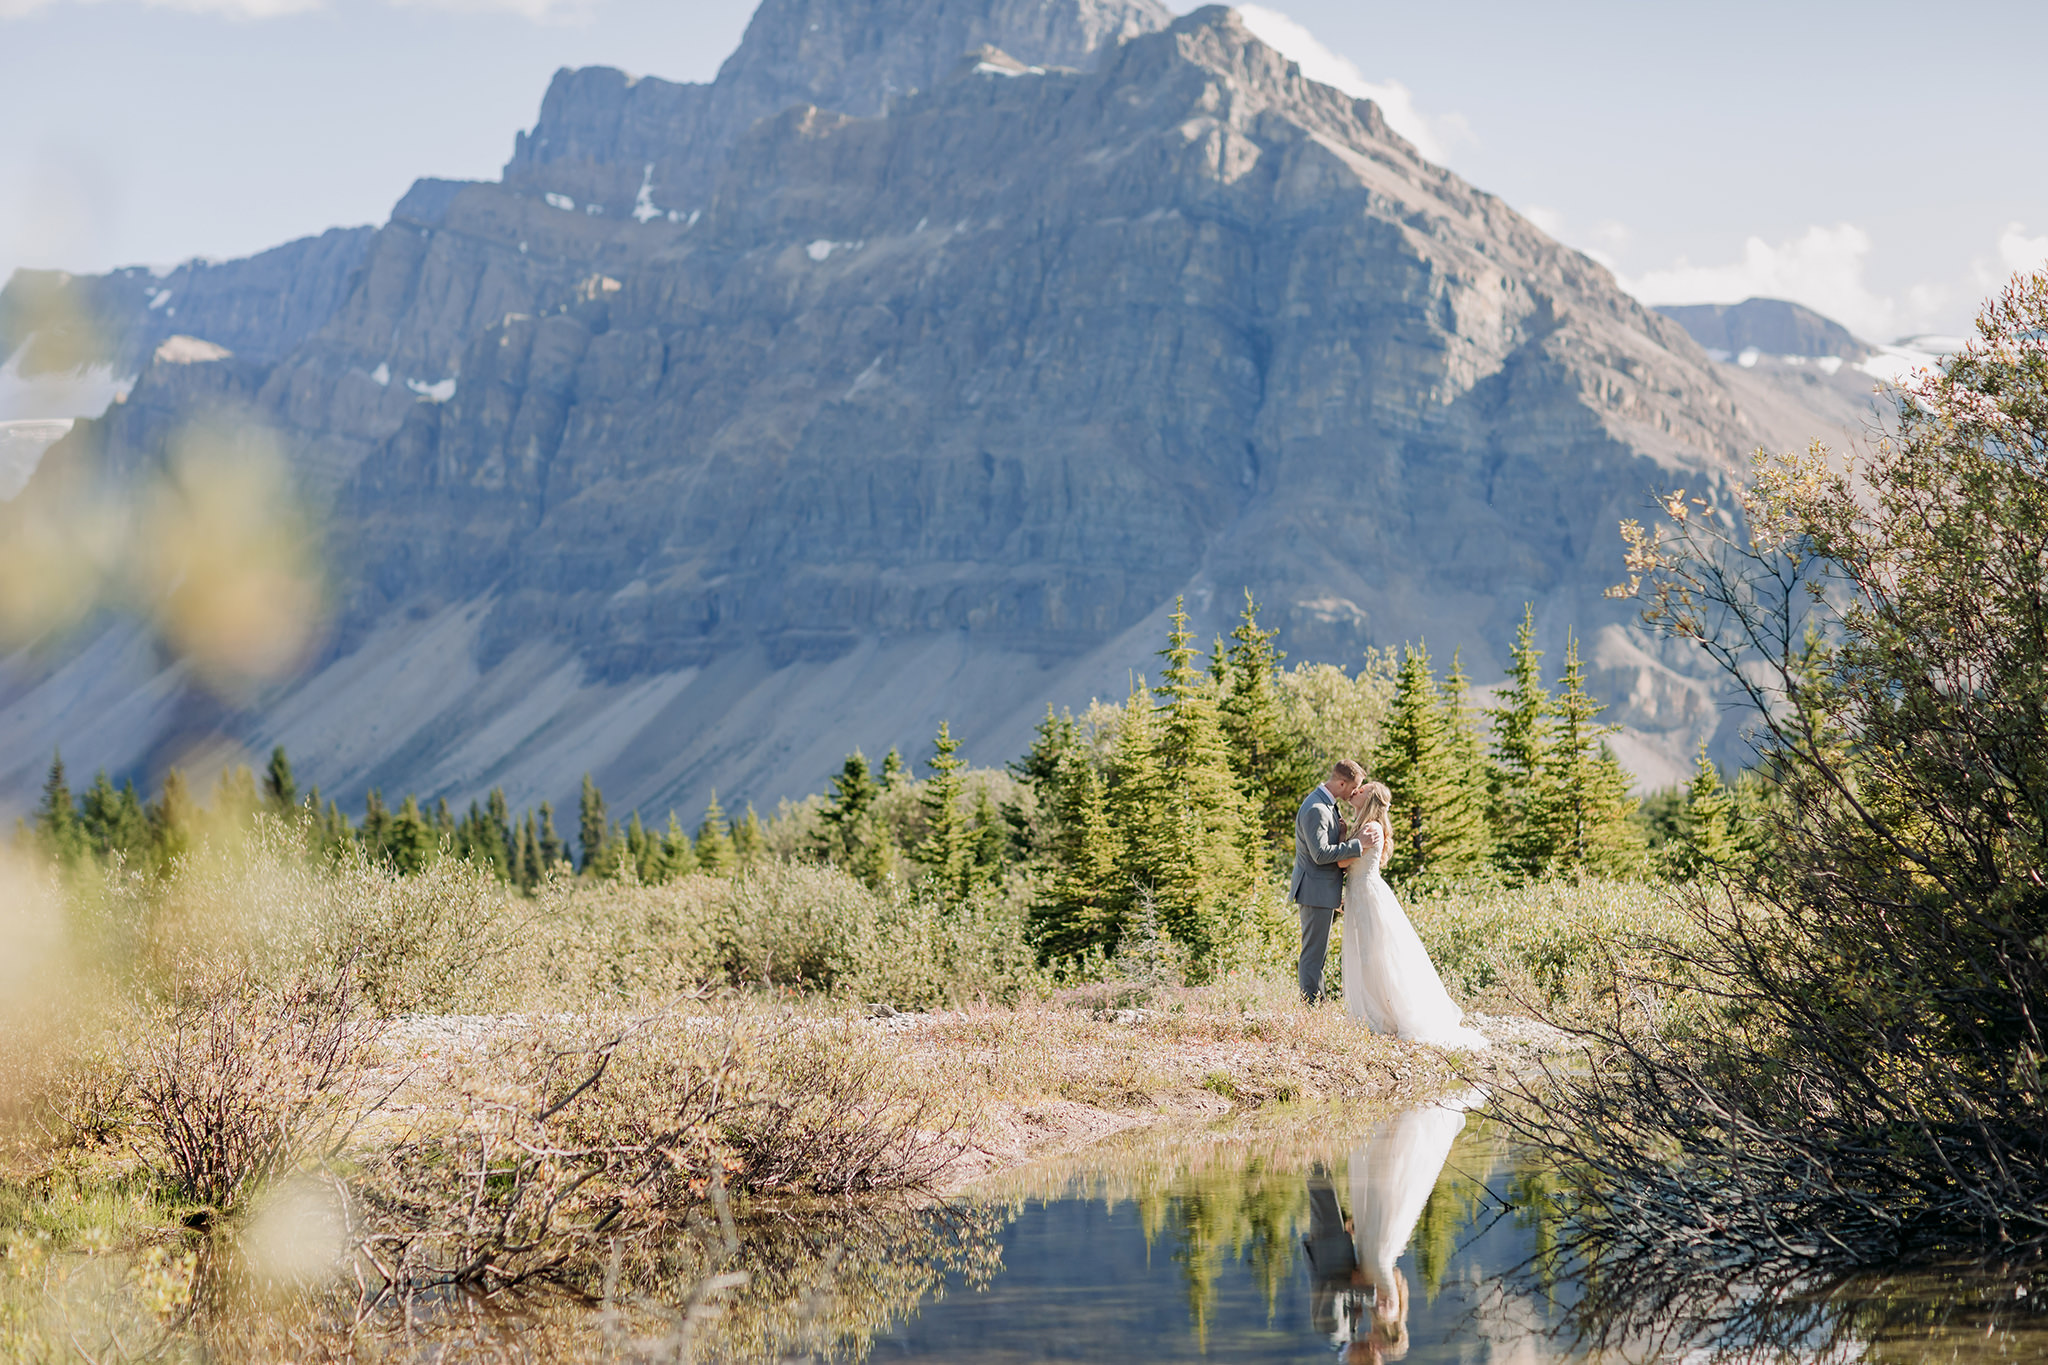 Exploring Icefields Parkway in Banff National Park on their wedding day. Summer mountain elopement off the beaten path photographed by local wedding & elopement photographer ENV Photography 